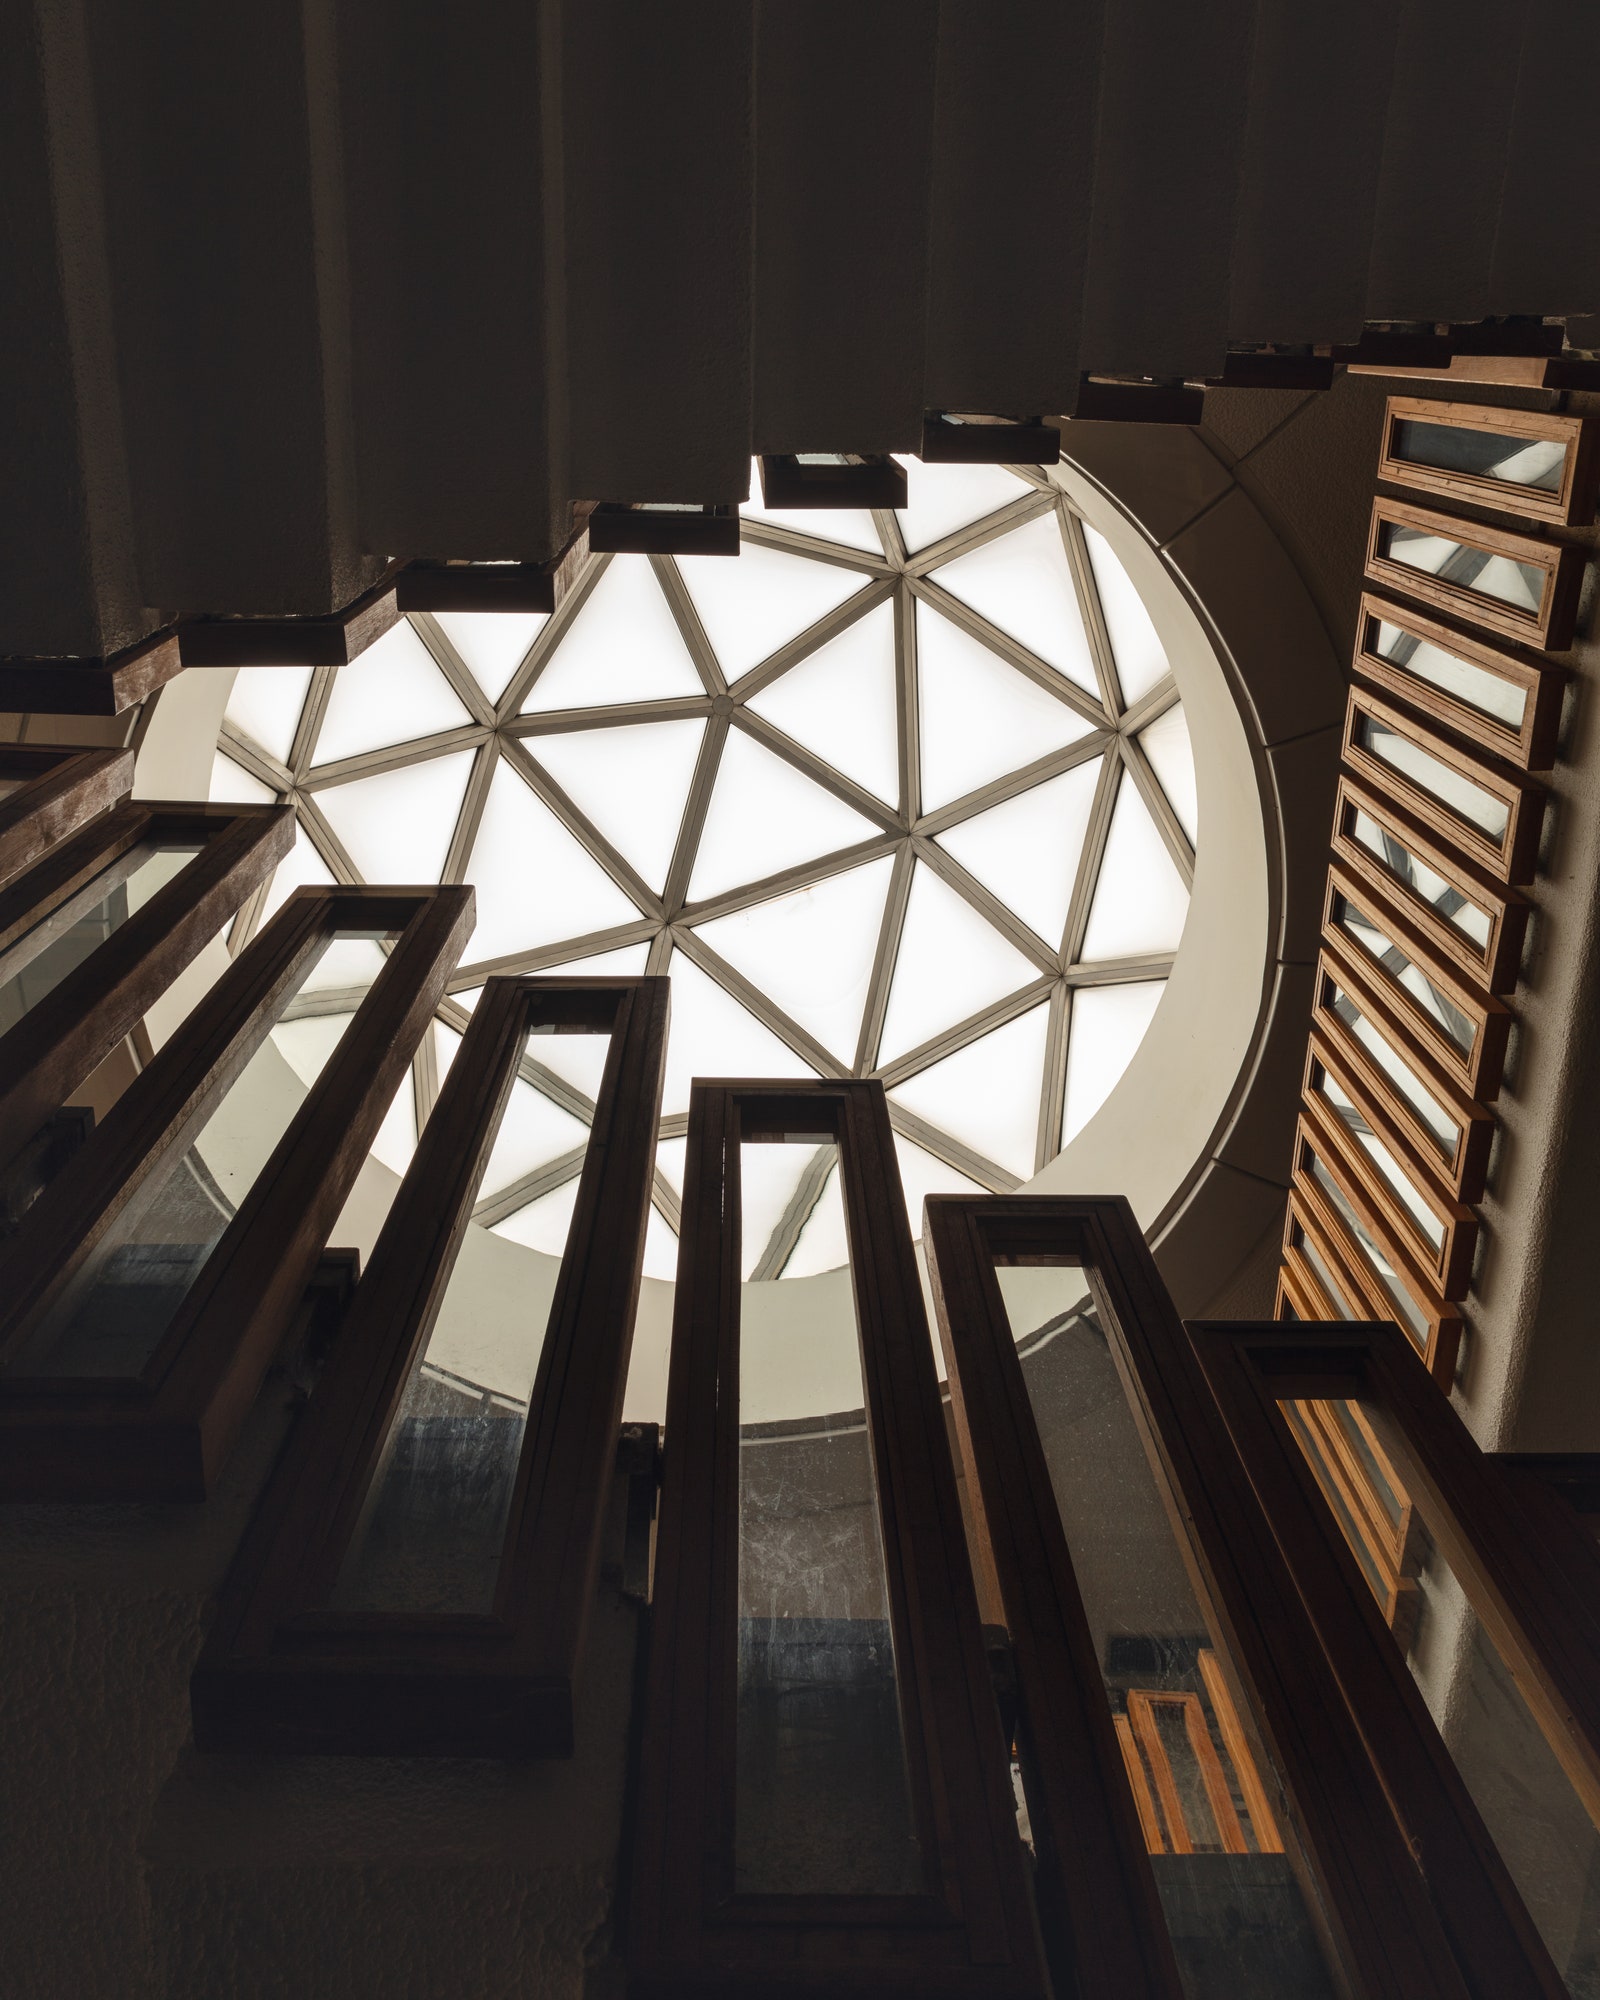 One of the 74 domes modelled on Richard Buckminster Fullers geodesic ones silhouettes the oak stairway rails. These...